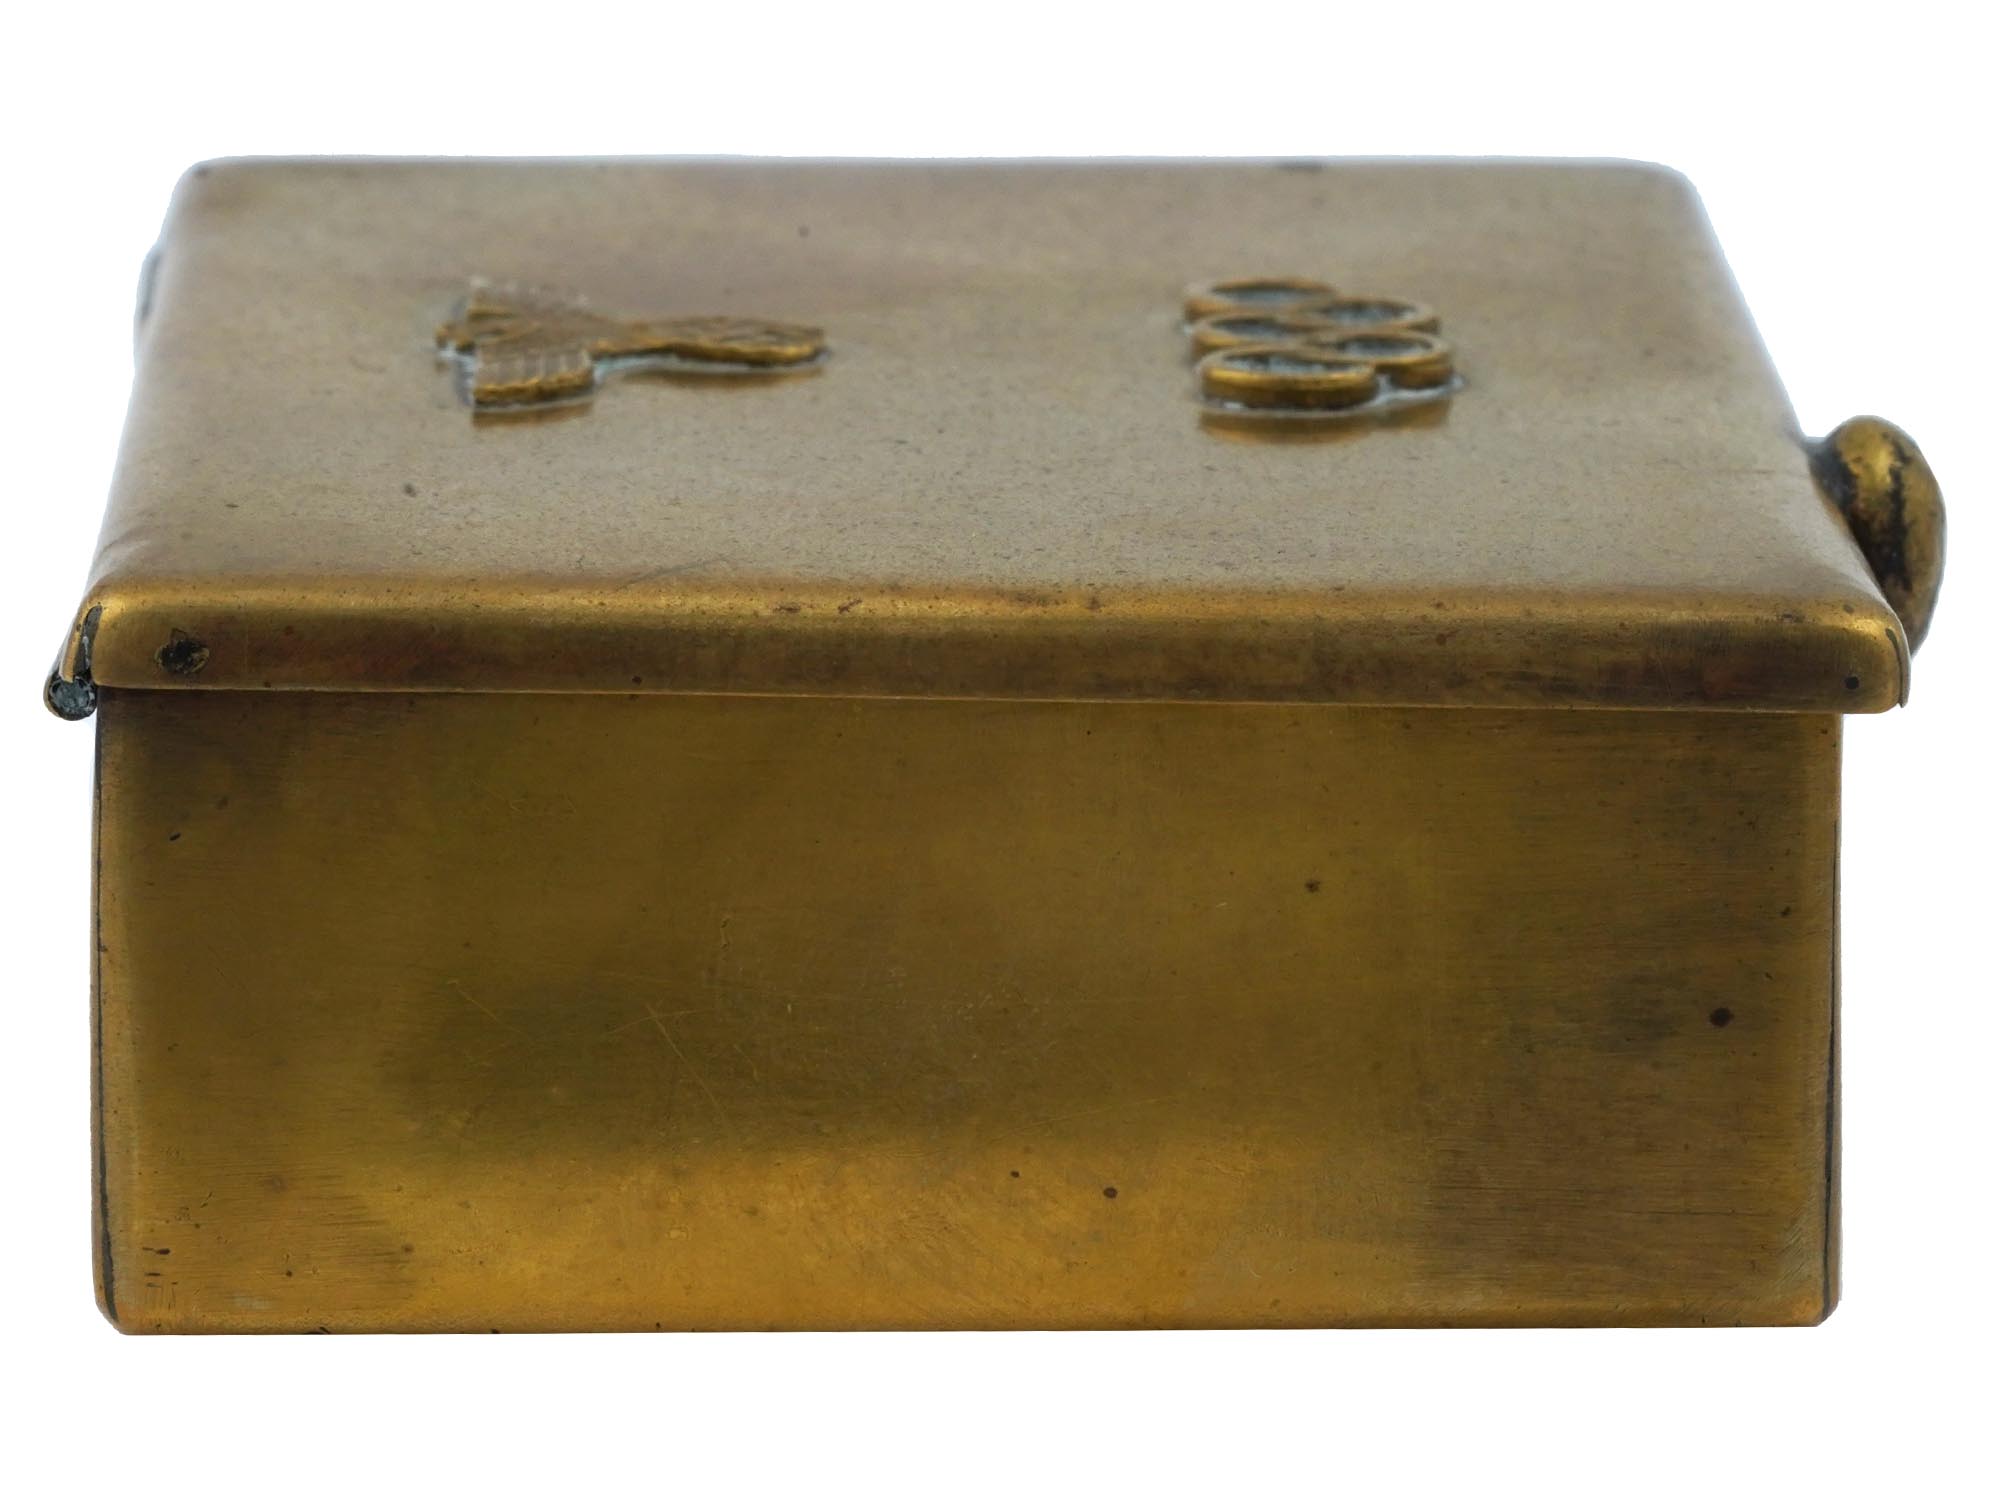 1936 WWII NAZI GERMAN OLYMPIC BRASS CIGARETTE CASE PIC-3